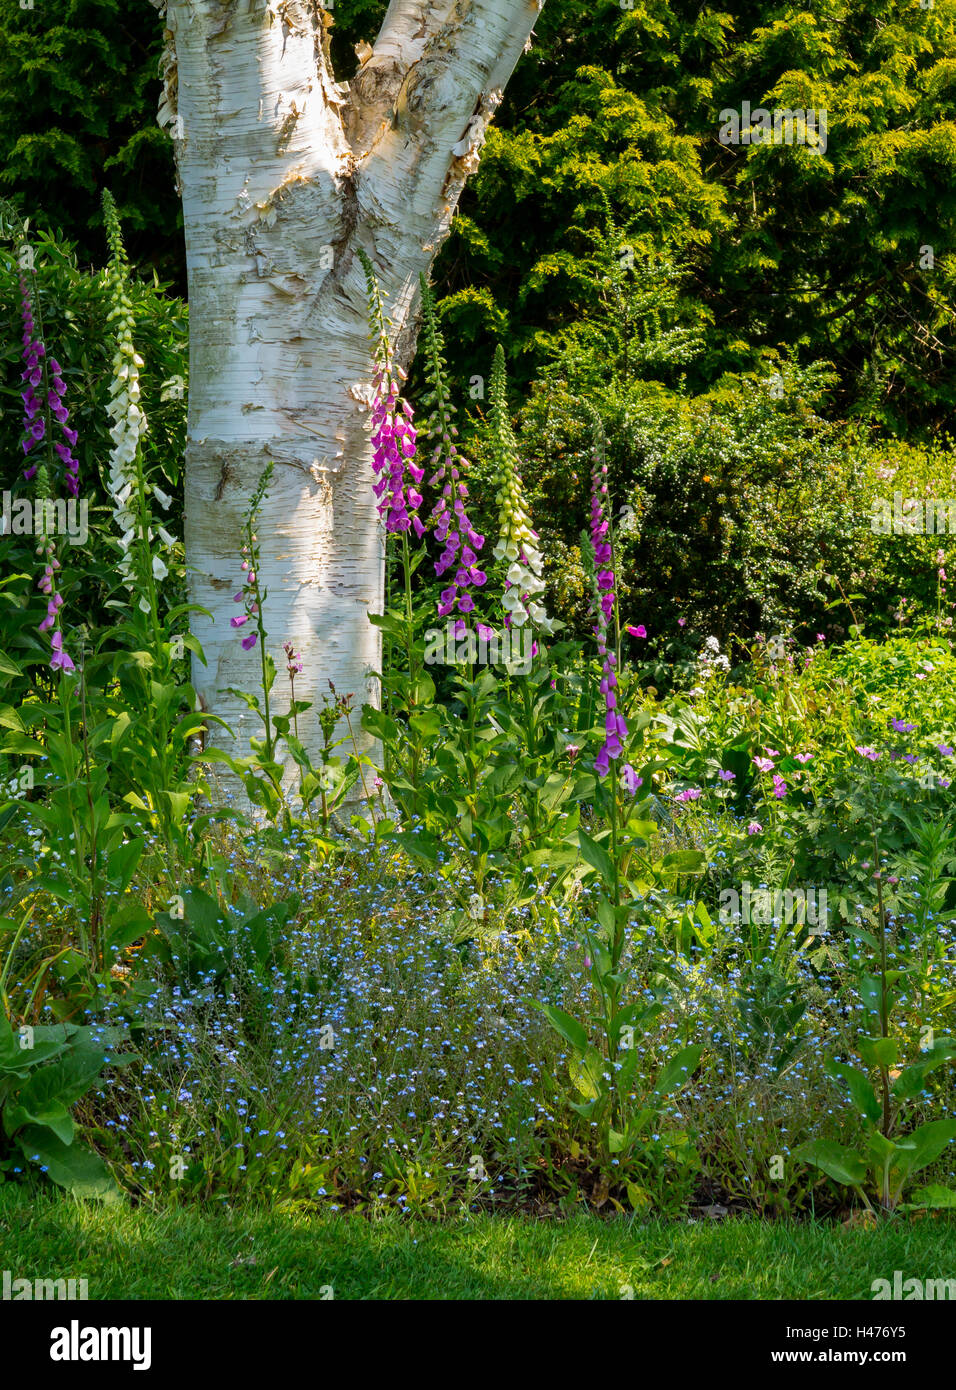 View of plants growing in early June at the Dorothy Clive Garden near Market Drayton in Shropshire England UK Stock Photo